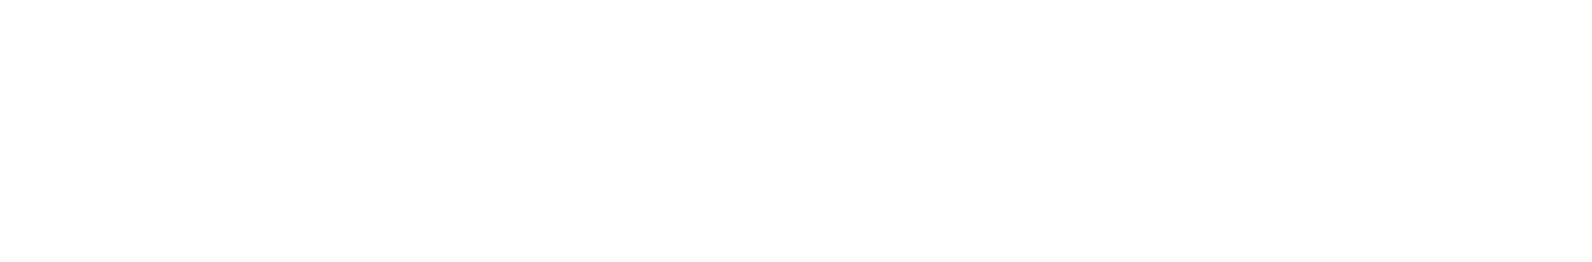 100% Commited to Diversity, Equity and Inclusion